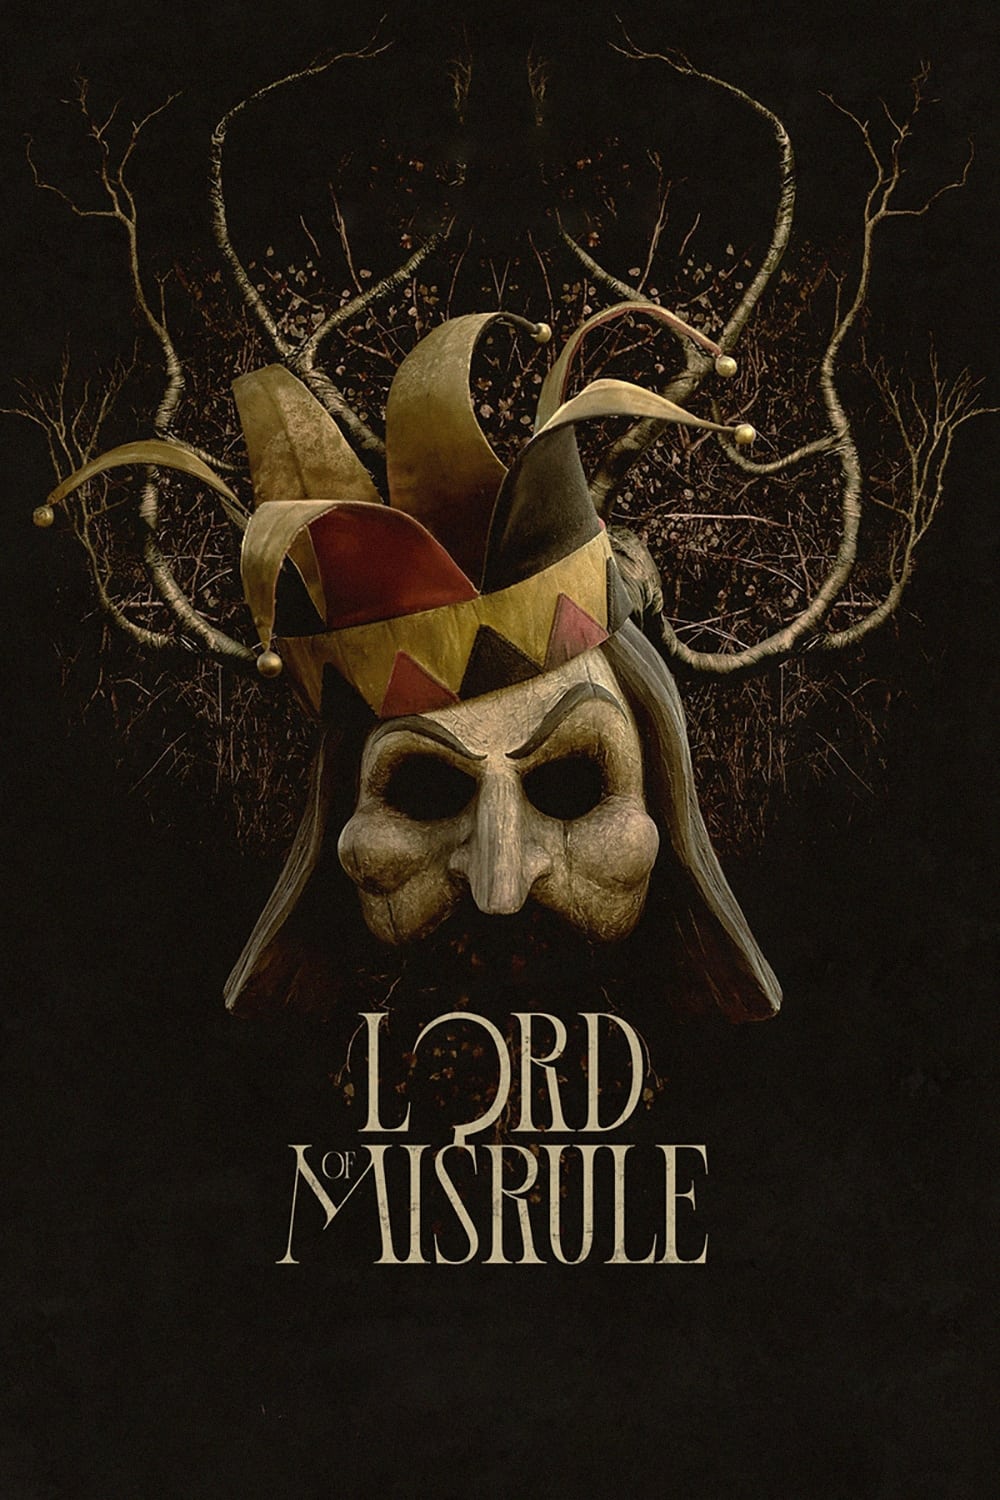 Poster for the movie "Lord of Misrule"